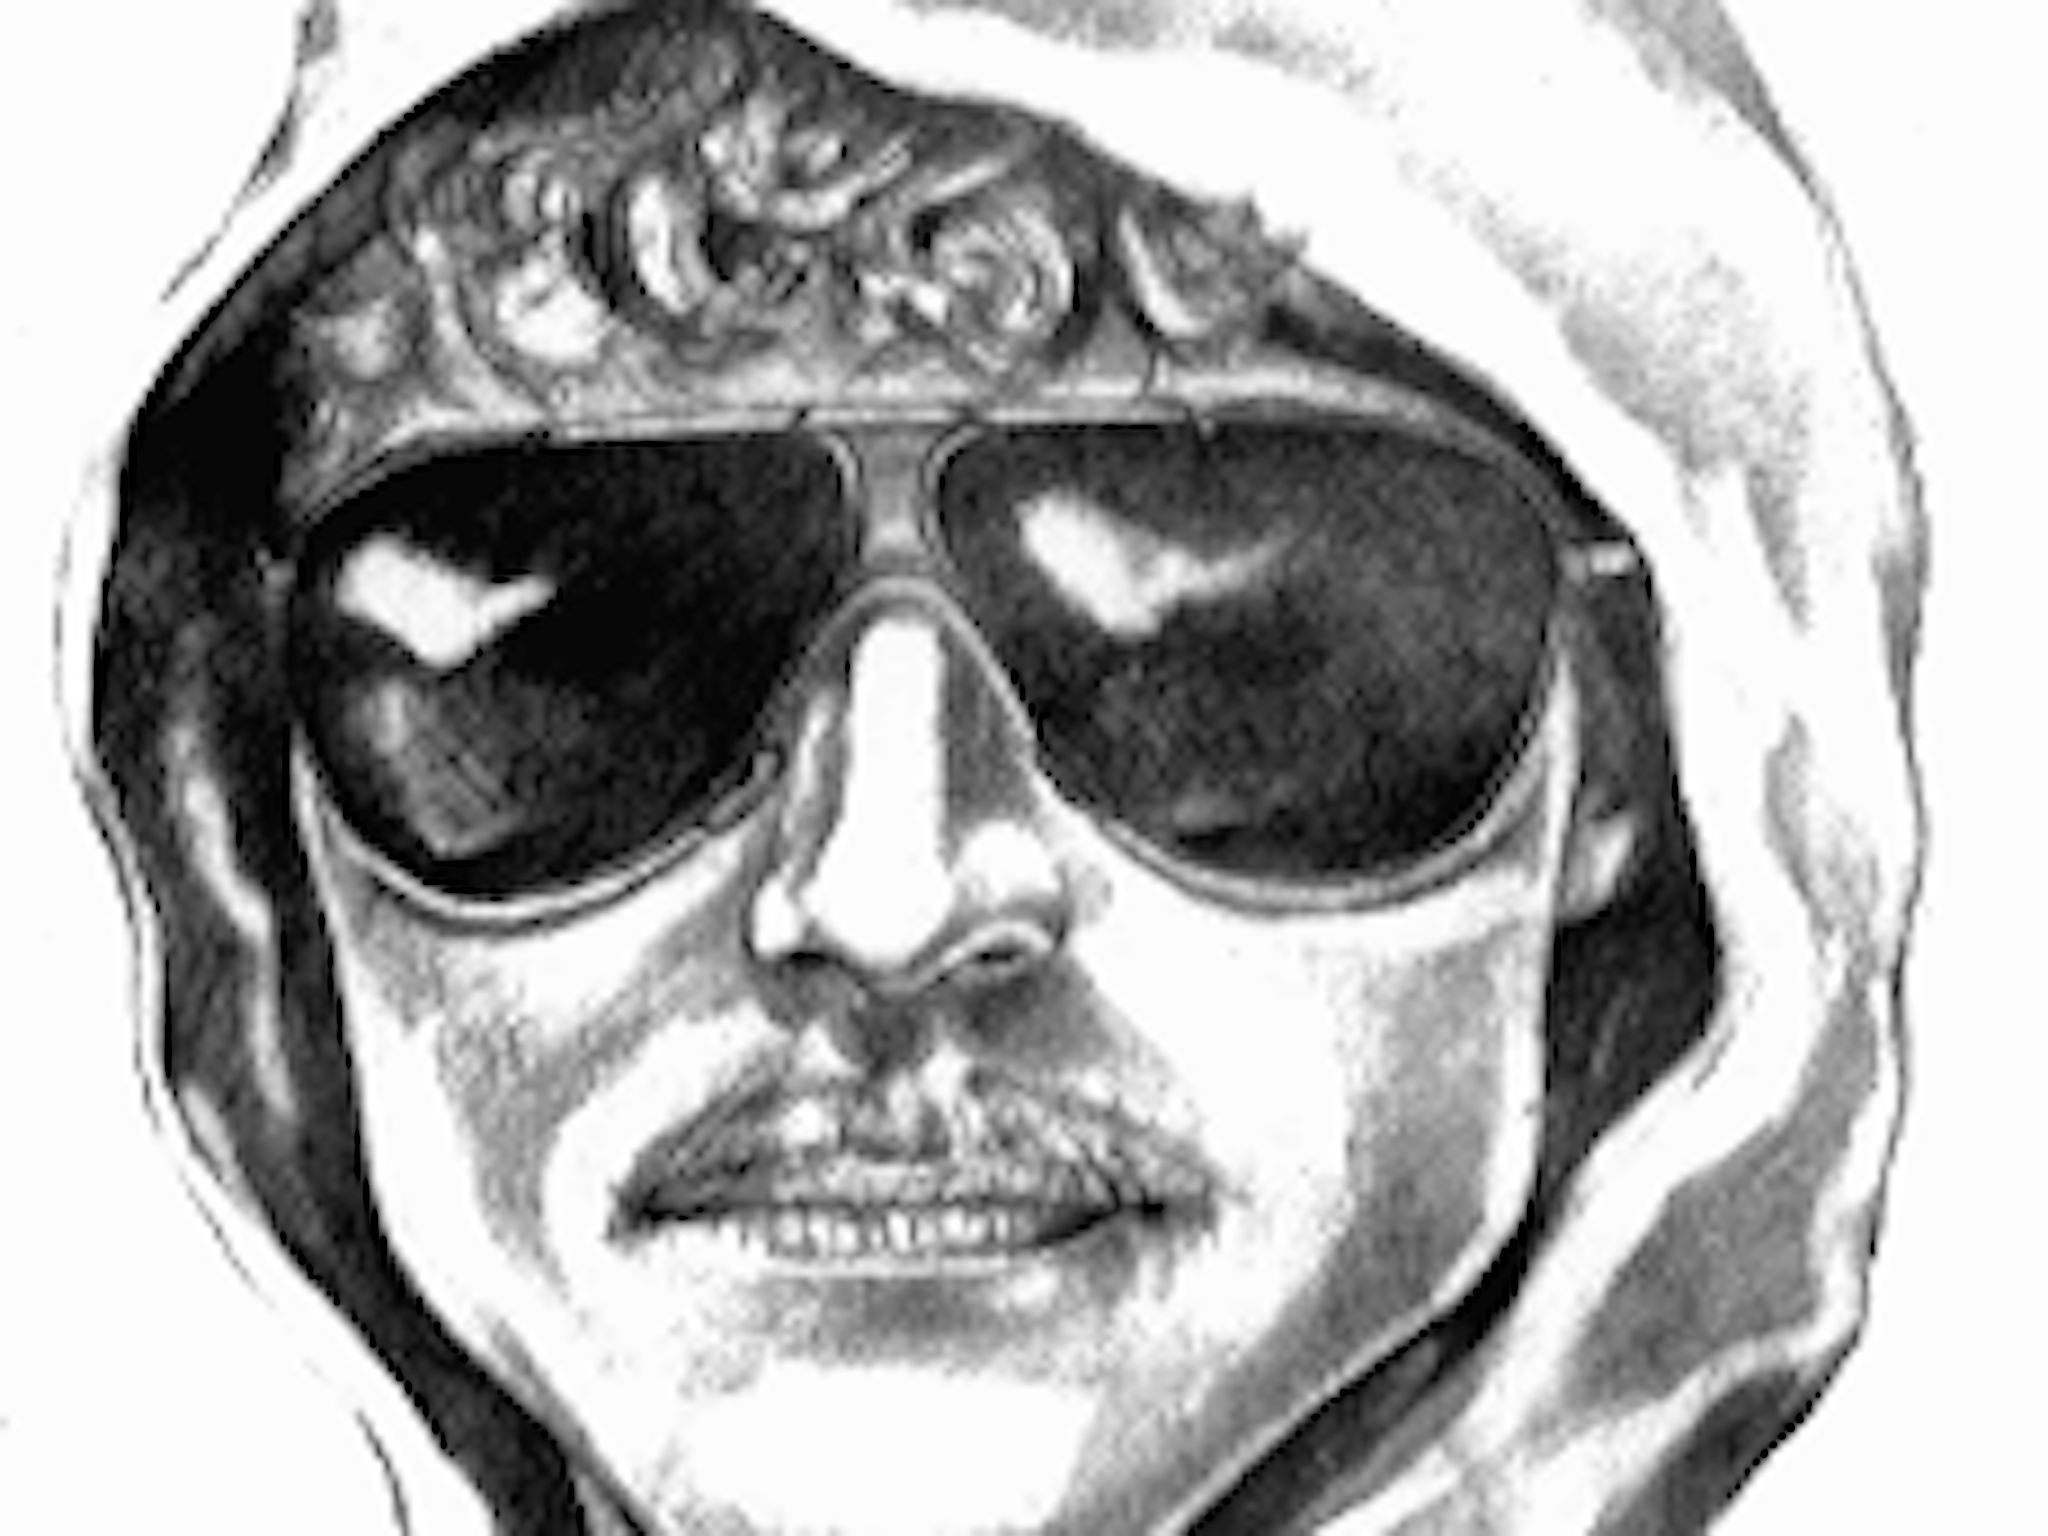 The infamous FBI sketch depicting the Unabomber Ted Kaczynski, who died by suicide in prison in 2023